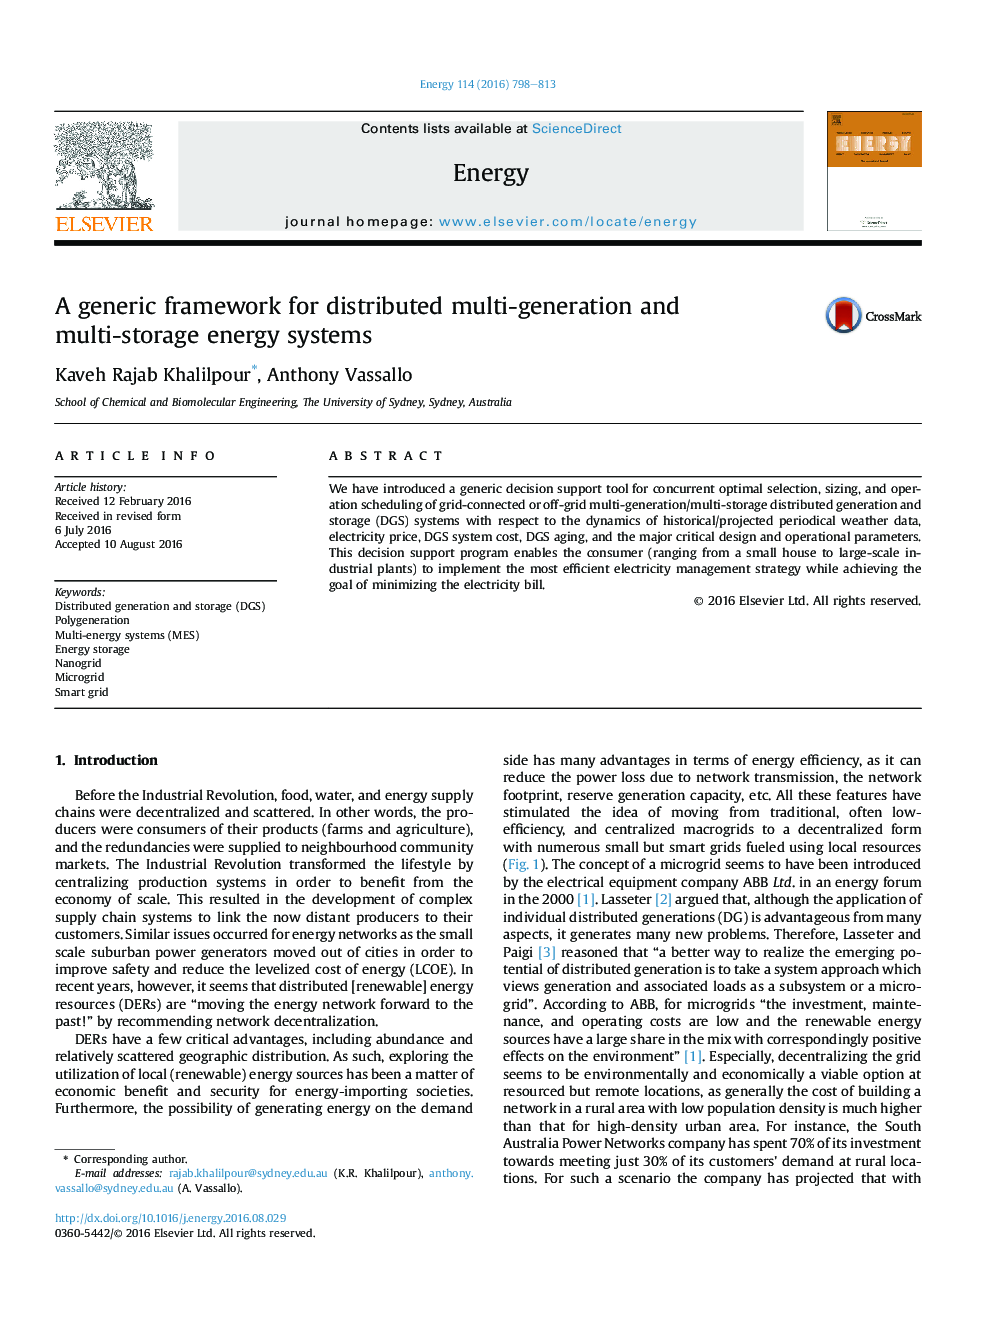 A generic framework for distributed multi-generation and multi-storage energy systems